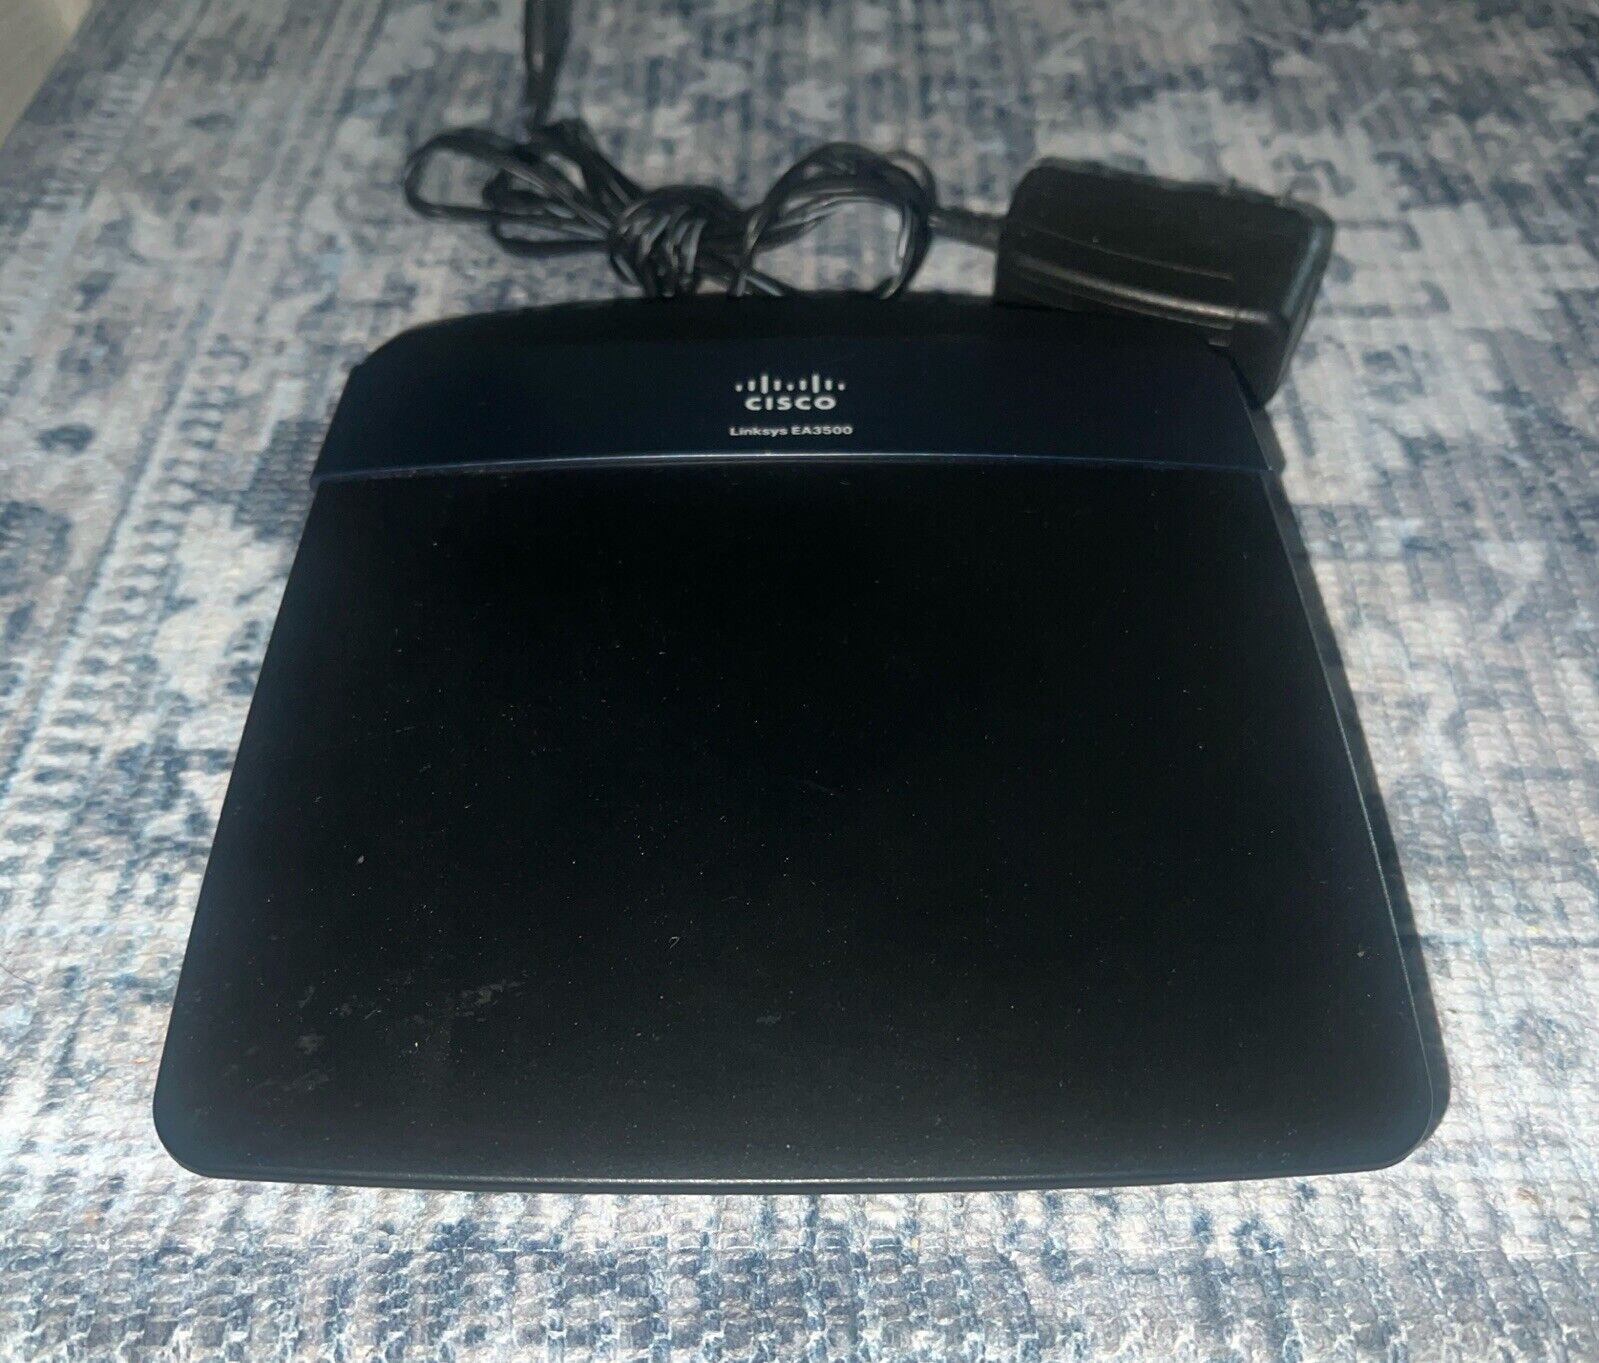 Used Linksys/Cisco EA3500 N750 Dual-Band Smart WiFi router